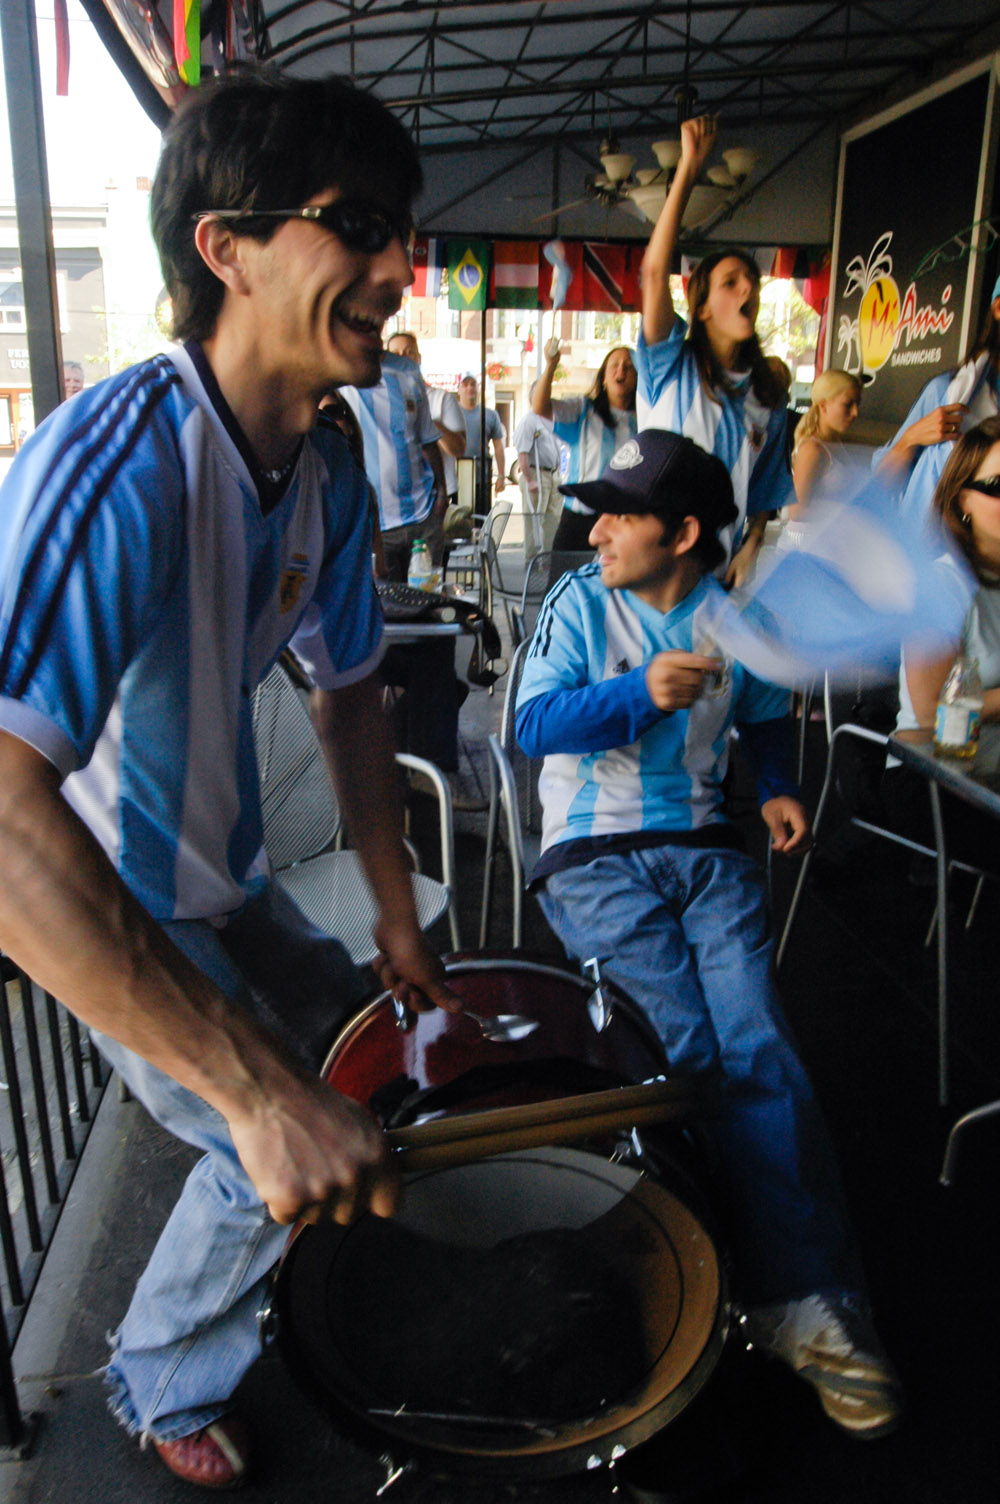 Argentina World Cup fans in Toronto